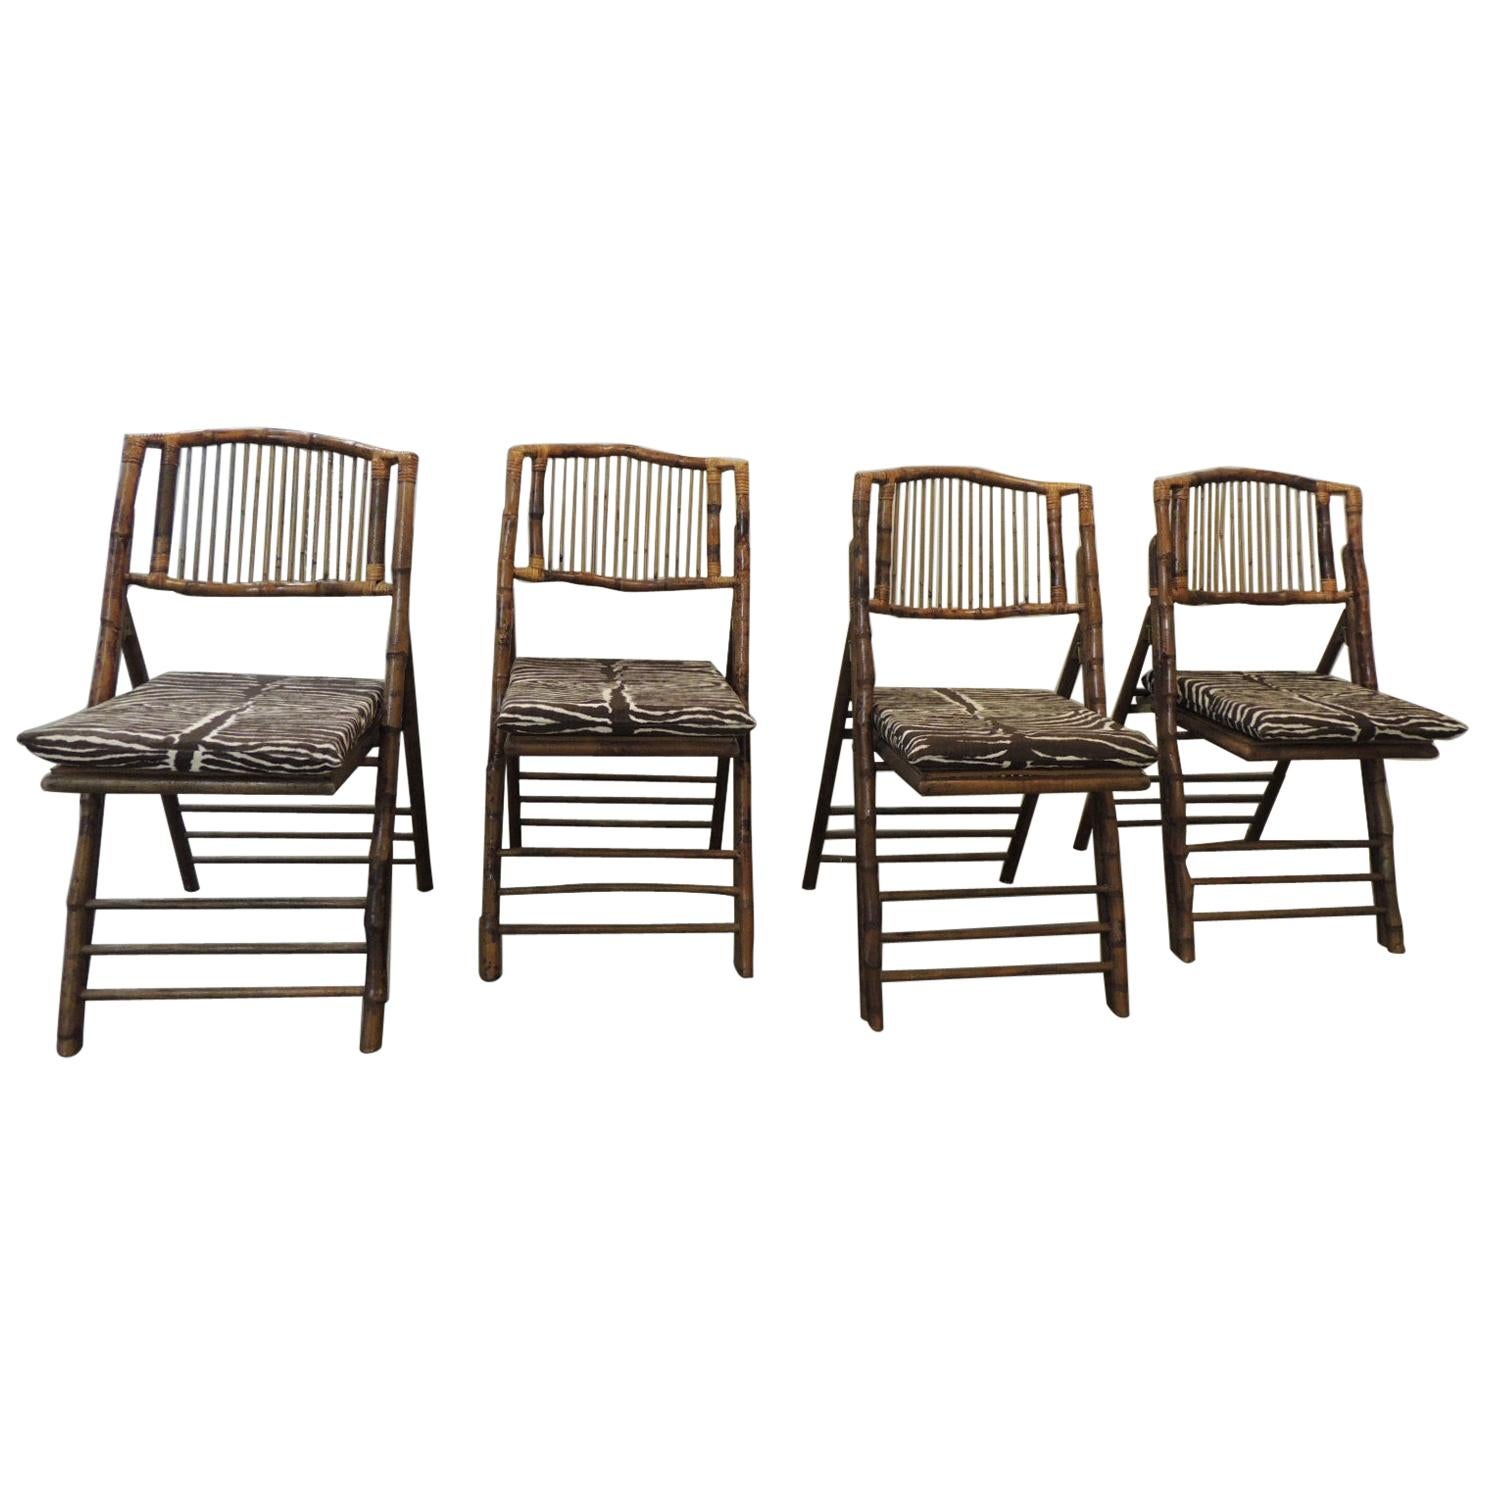 Set of '4' Vintage Tortoise Bamboo Folding Chairs with Seat Cushions